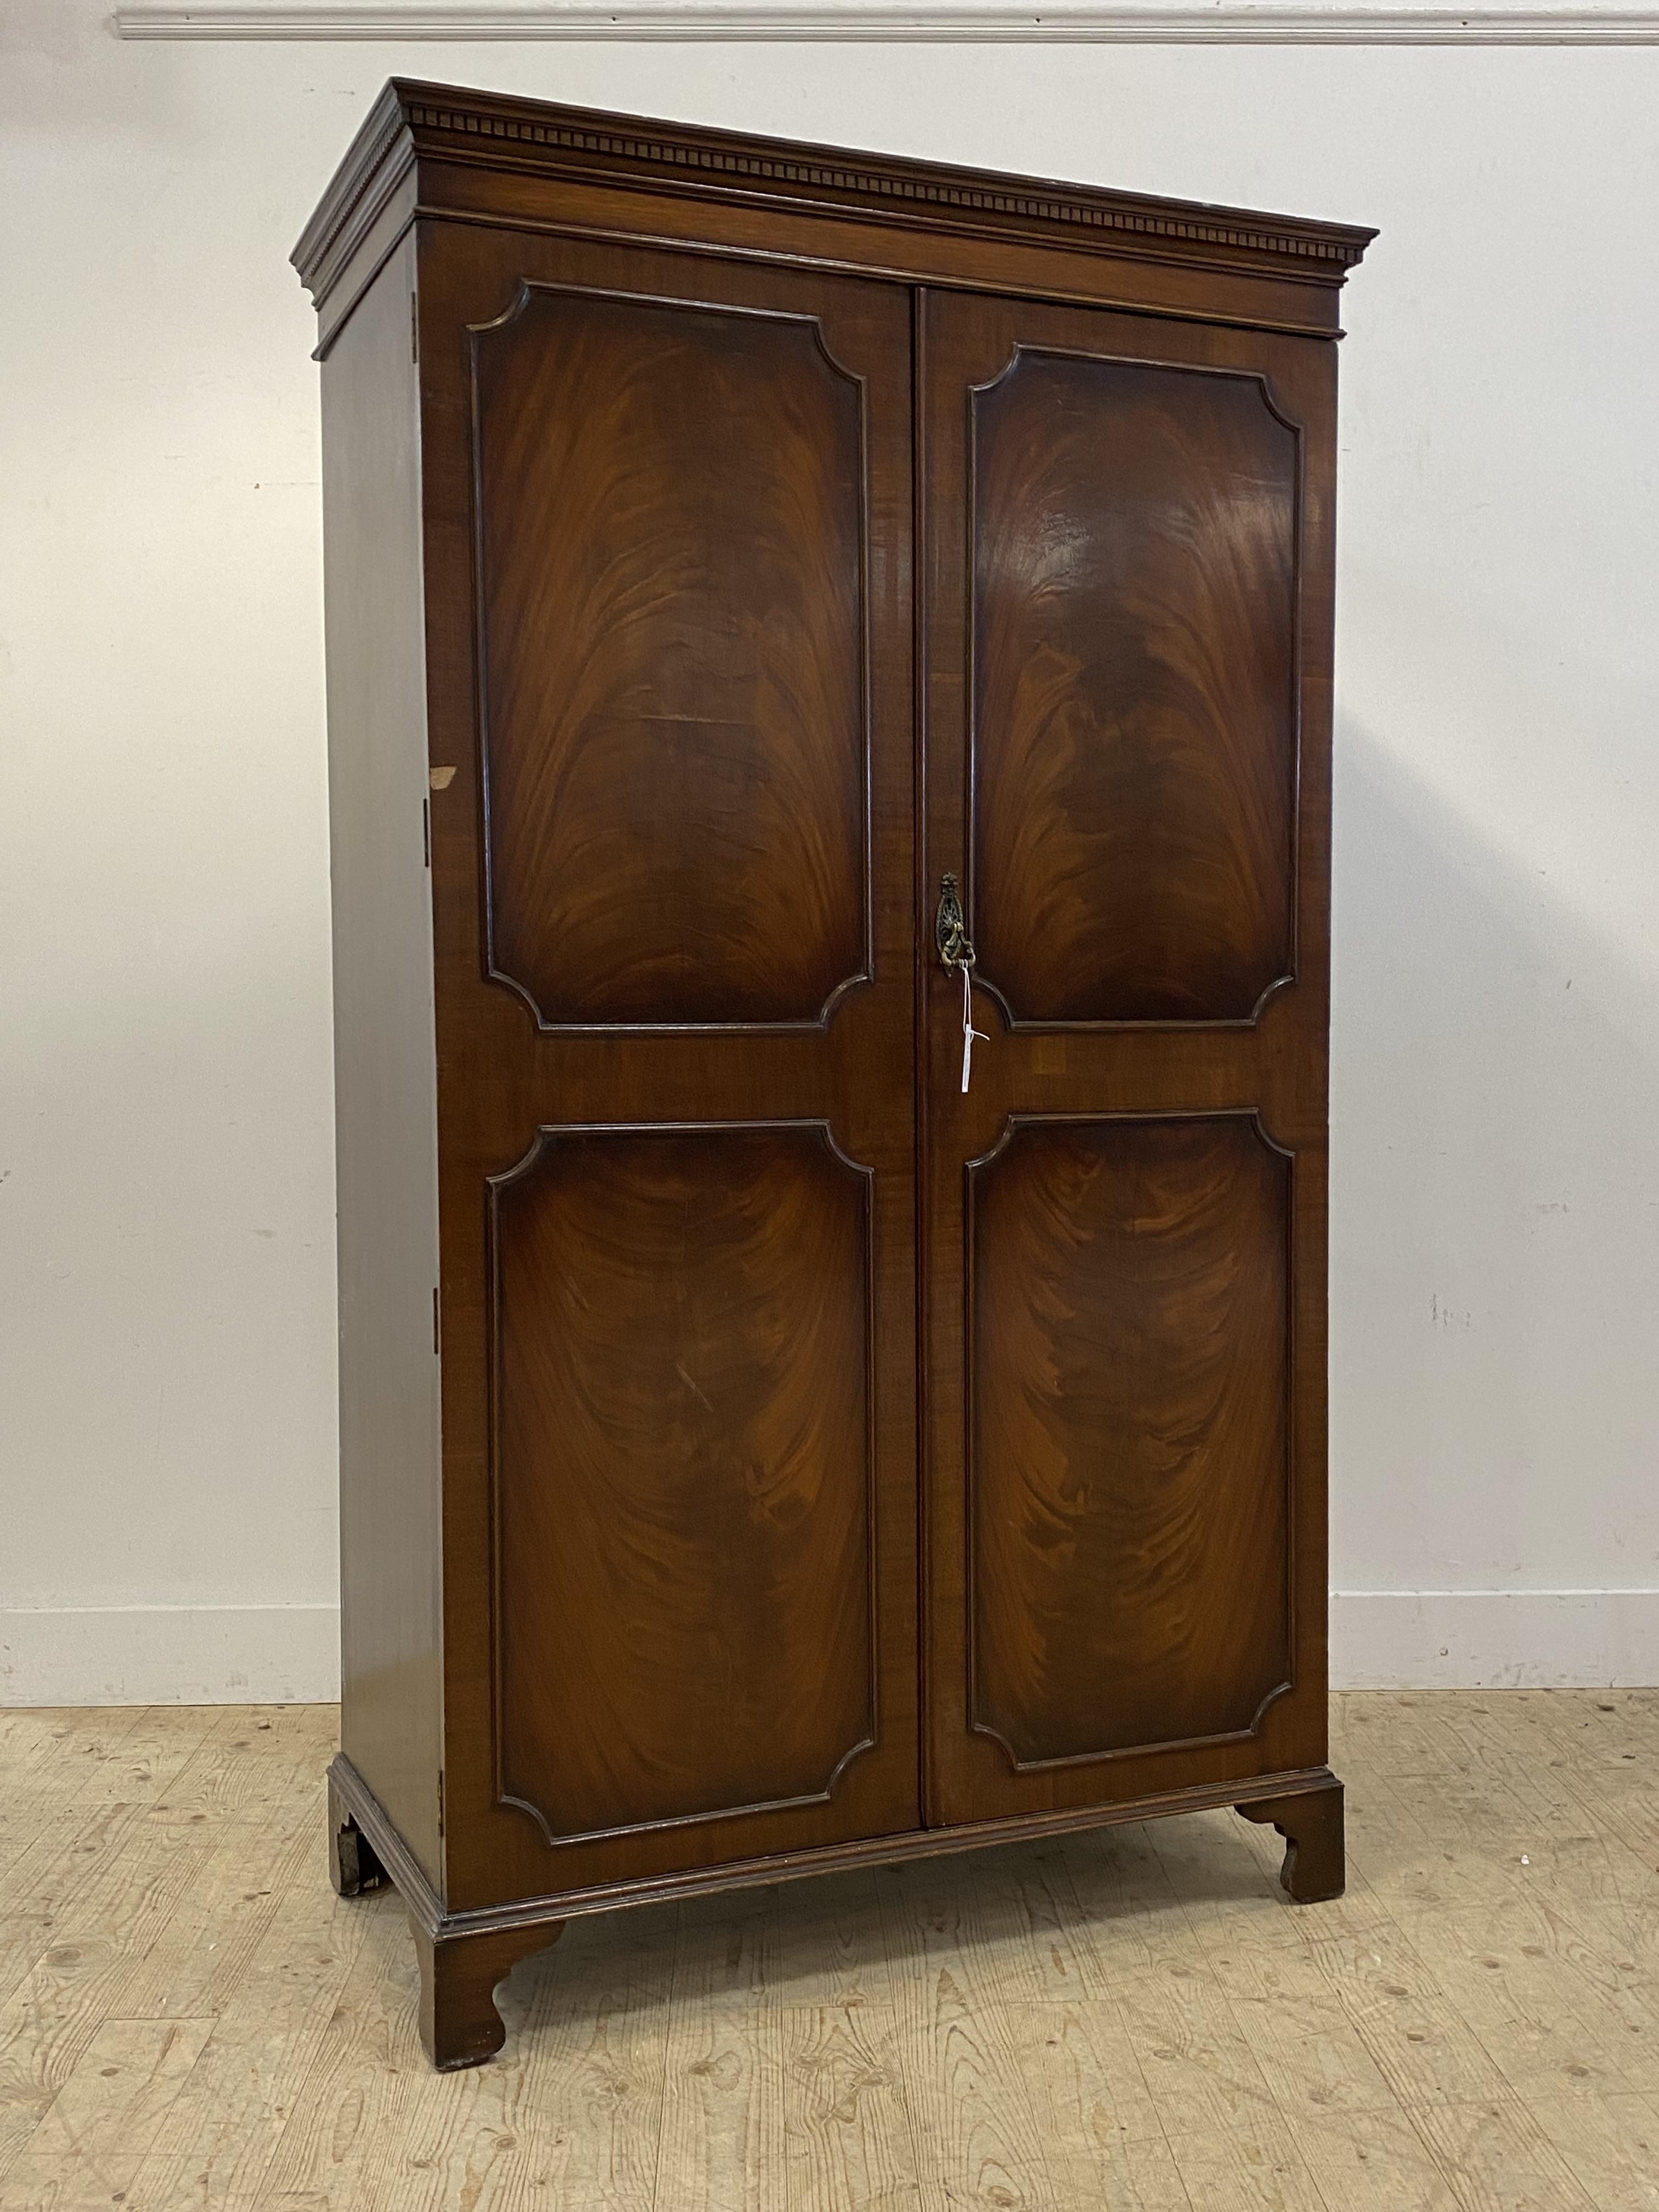 An early 20th century mahogany wardrobe, with dentil cornice over two twin panelled doors opening to